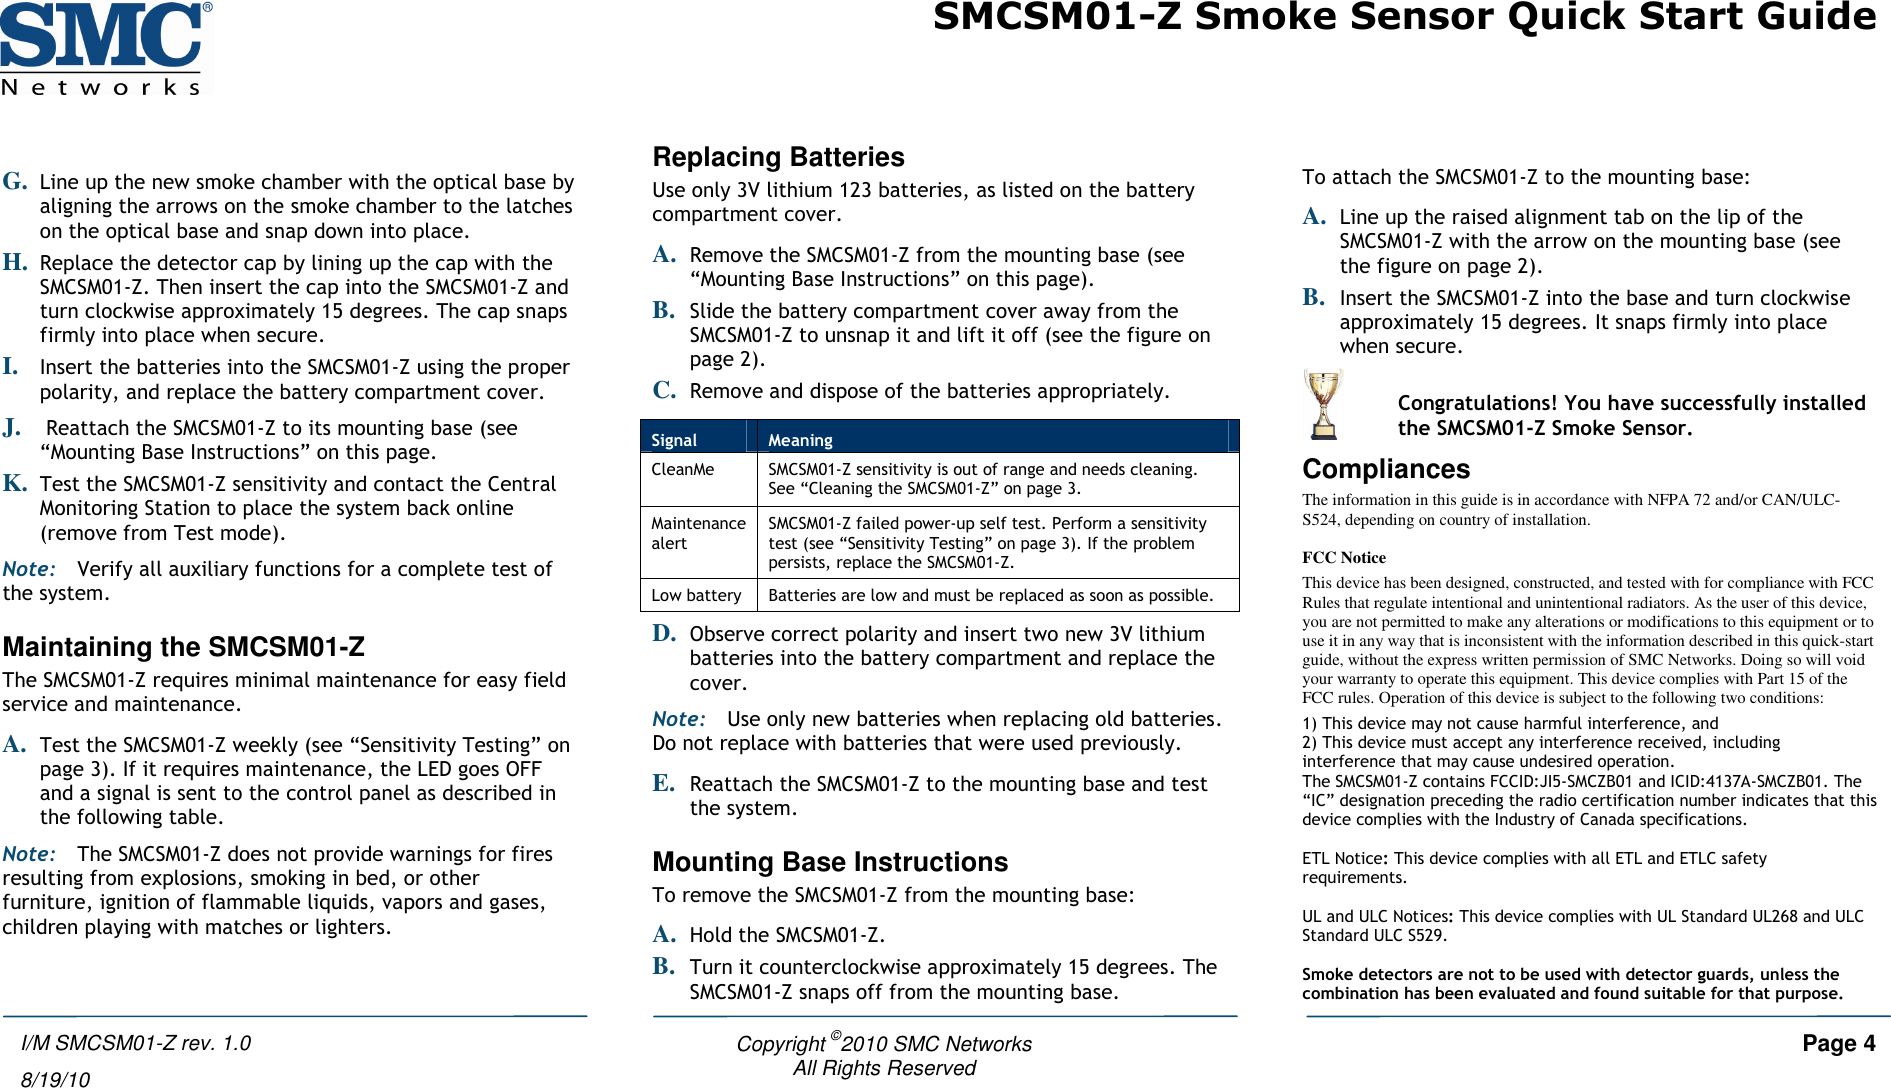 SMCSM01-Z Smoke Sensor Quick Start Guide   Copyright ©2010 SMC Networks     Page 4 All Rights Reserved  I/M SMCSM01-Z rev. 1.0 8/19/10  G. Line up the new smoke chamber with the optical base by aligning the arrows on the smoke chamber to the latches on the optical base and snap down into place. H. Replace the detector cap by lining up the cap with the SMCSM01-Z. Then insert the cap into the SMCSM01-Z and turn clockwise approximately 15 degrees. The cap snaps firmly into place when secure. I. Insert the batteries into the SMCSM01-Z using the proper polarity, and replace the battery compartment cover. J.  Reattach the SMCSM01-Z to its mounting base (see “Mounting Base Instructions” on this page. K. Test the SMCSM01-Z sensitivity and contact the Central Monitoring Station to place the system back online (remove from Test mode). Note: Verify all auxiliary functions for a complete test of the system. Maintaining the SMCSM01-Z The SMCSM01-Z requires minimal maintenance for easy field service and maintenance.  A. Test the SMCSM01-Z weekly (see “Sensitivity Testing” on page 3). If it requires maintenance, the LED goes OFF and a signal is sent to the control panel as described in the following table. Note: The SMCSM01-Z does not provide warnings for fires resulting from explosions, smoking in bed, or other furniture, ignition of flammable liquids, vapors and gases, children playing with matches or lighters. Replacing Batteries Use only 3V lithium 123 batteries, as listed on the battery compartment cover. A. Remove the SMCSM01-Z from the mounting base (see “Mounting Base Instructions” on this page). B. Slide the battery compartment cover away from the SMCSM01-Z to unsnap it and lift it off (see the figure on page 2). C. Remove and dispose of the batteries appropriately. D. Observe correct polarity and insert two new 3V lithium batteries into the battery compartment and replace the cover.  Note: Use only new batteries when replacing old batteries. Do not replace with batteries that were used previously. E. Reattach the SMCSM01-Z to the mounting base and test the system. Mounting Base Instructions To remove the SMCSM01-Z from the mounting base: A. Hold the SMCSM01-Z. B. Turn it counterclockwise approximately 15 degrees. The SMCSM01-Z snaps off from the mounting base.  To attach the SMCSM01-Z to the mounting base:  A. Line up the raised alignment tab on the lip of the SMCSM01-Z with the arrow on the mounting base (see the figure on page 2). B. Insert the SMCSM01-Z into the base and turn clockwise approximately 15 degrees. It snaps firmly into place when secure.  Compliances The information in this guide is in accordance with NFPA 72 and/or CAN/ULC-S524, depending on country of installation.  FCC Notice This device has been designed, constructed, and tested with for compliance with FCC Rules that regulate intentional and unintentional radiators. As the user of this device, you are not permitted to make any alterations or modifications to this equipment or to use it in any way that is inconsistent with the information described in this quick-start guide, without the express written permission of SMC Networks. Doing so will void your warranty to operate this equipment. This device complies with Part 15 of the FCC rules. Operation of this device is subject to the following two conditions:  1) This device may not cause harmful interference, and  2) This device must accept any interference received, including interference that may cause undesired operation. The SMCSM01-Z contains FCCID:JI5-SMCZB01 and ICID:4137A-SMCZB01. The “IC” designation preceding the radio certification number indicates that this device complies with the Industry of Canada specifications.  ETL Notice: This device complies with all ETL and ETLC safety requirements.  UL and ULC Notices: This device complies with UL Standard UL268 and ULC Standard ULC S529.  Smoke detectors are not to be used with detector guards, unless the combination has been evaluated and found suitable for that purpose. Signal  Meaning CleanMe  SMCSM01-Z sensitivity is out of range and needs cleaning. See “Cleaning the SMCSM01-Z” on page 3. Maintenance alert SMCSM01-Z failed power-up self test. Perform a sensitivity test (see “Sensitivity Testing” on page 3). If the problem persists, replace the SMCSM01-Z. Low battery  Batteries are low and must be replaced as soon as possible.   Congratulations! You have successfully installed the SMCSM01-Z Smoke Sensor. 